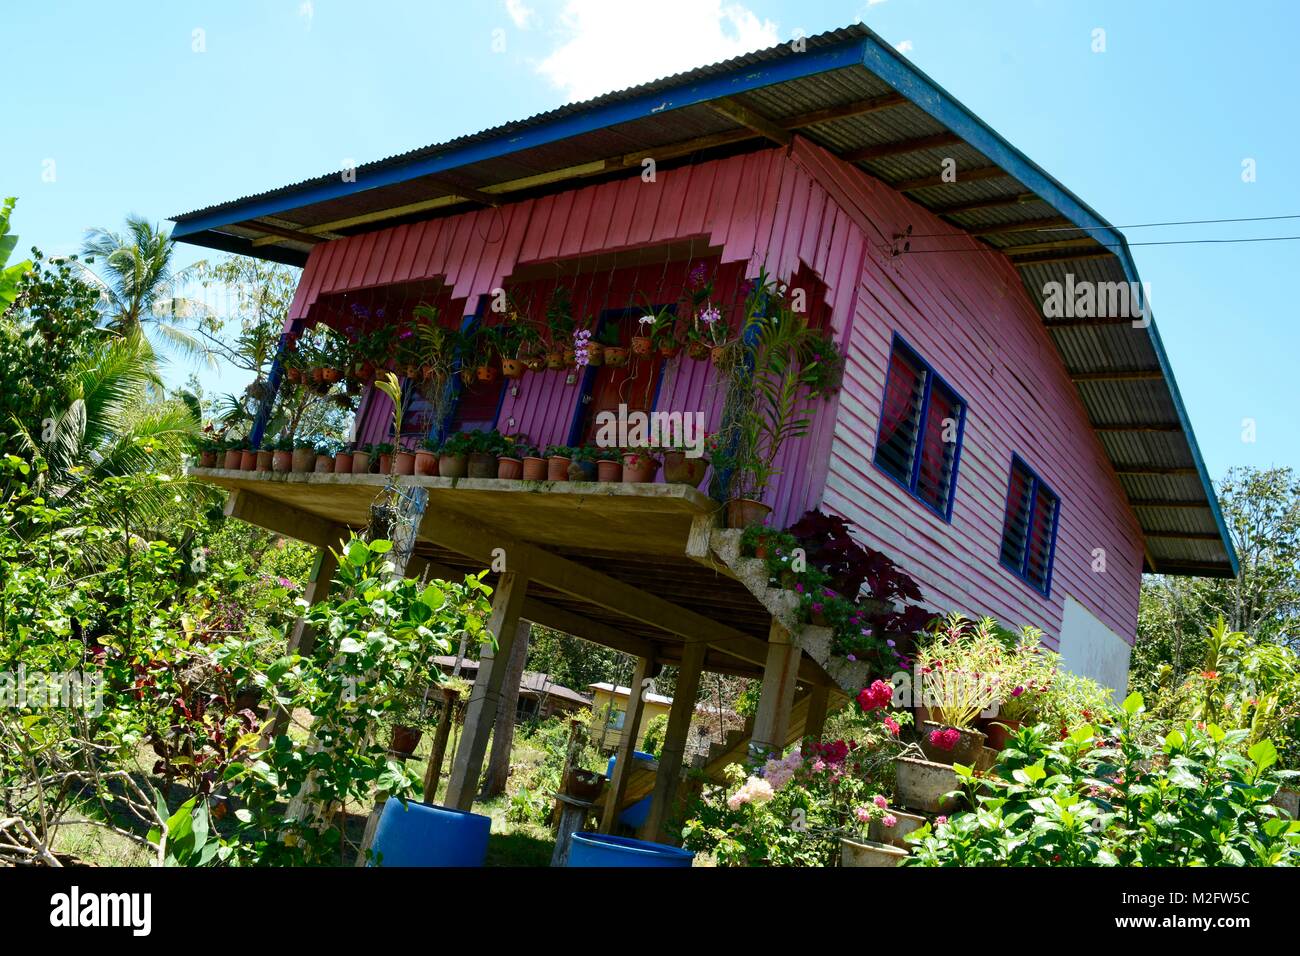 Colourful stilted house from Sarawak, Borneo Stock Photo